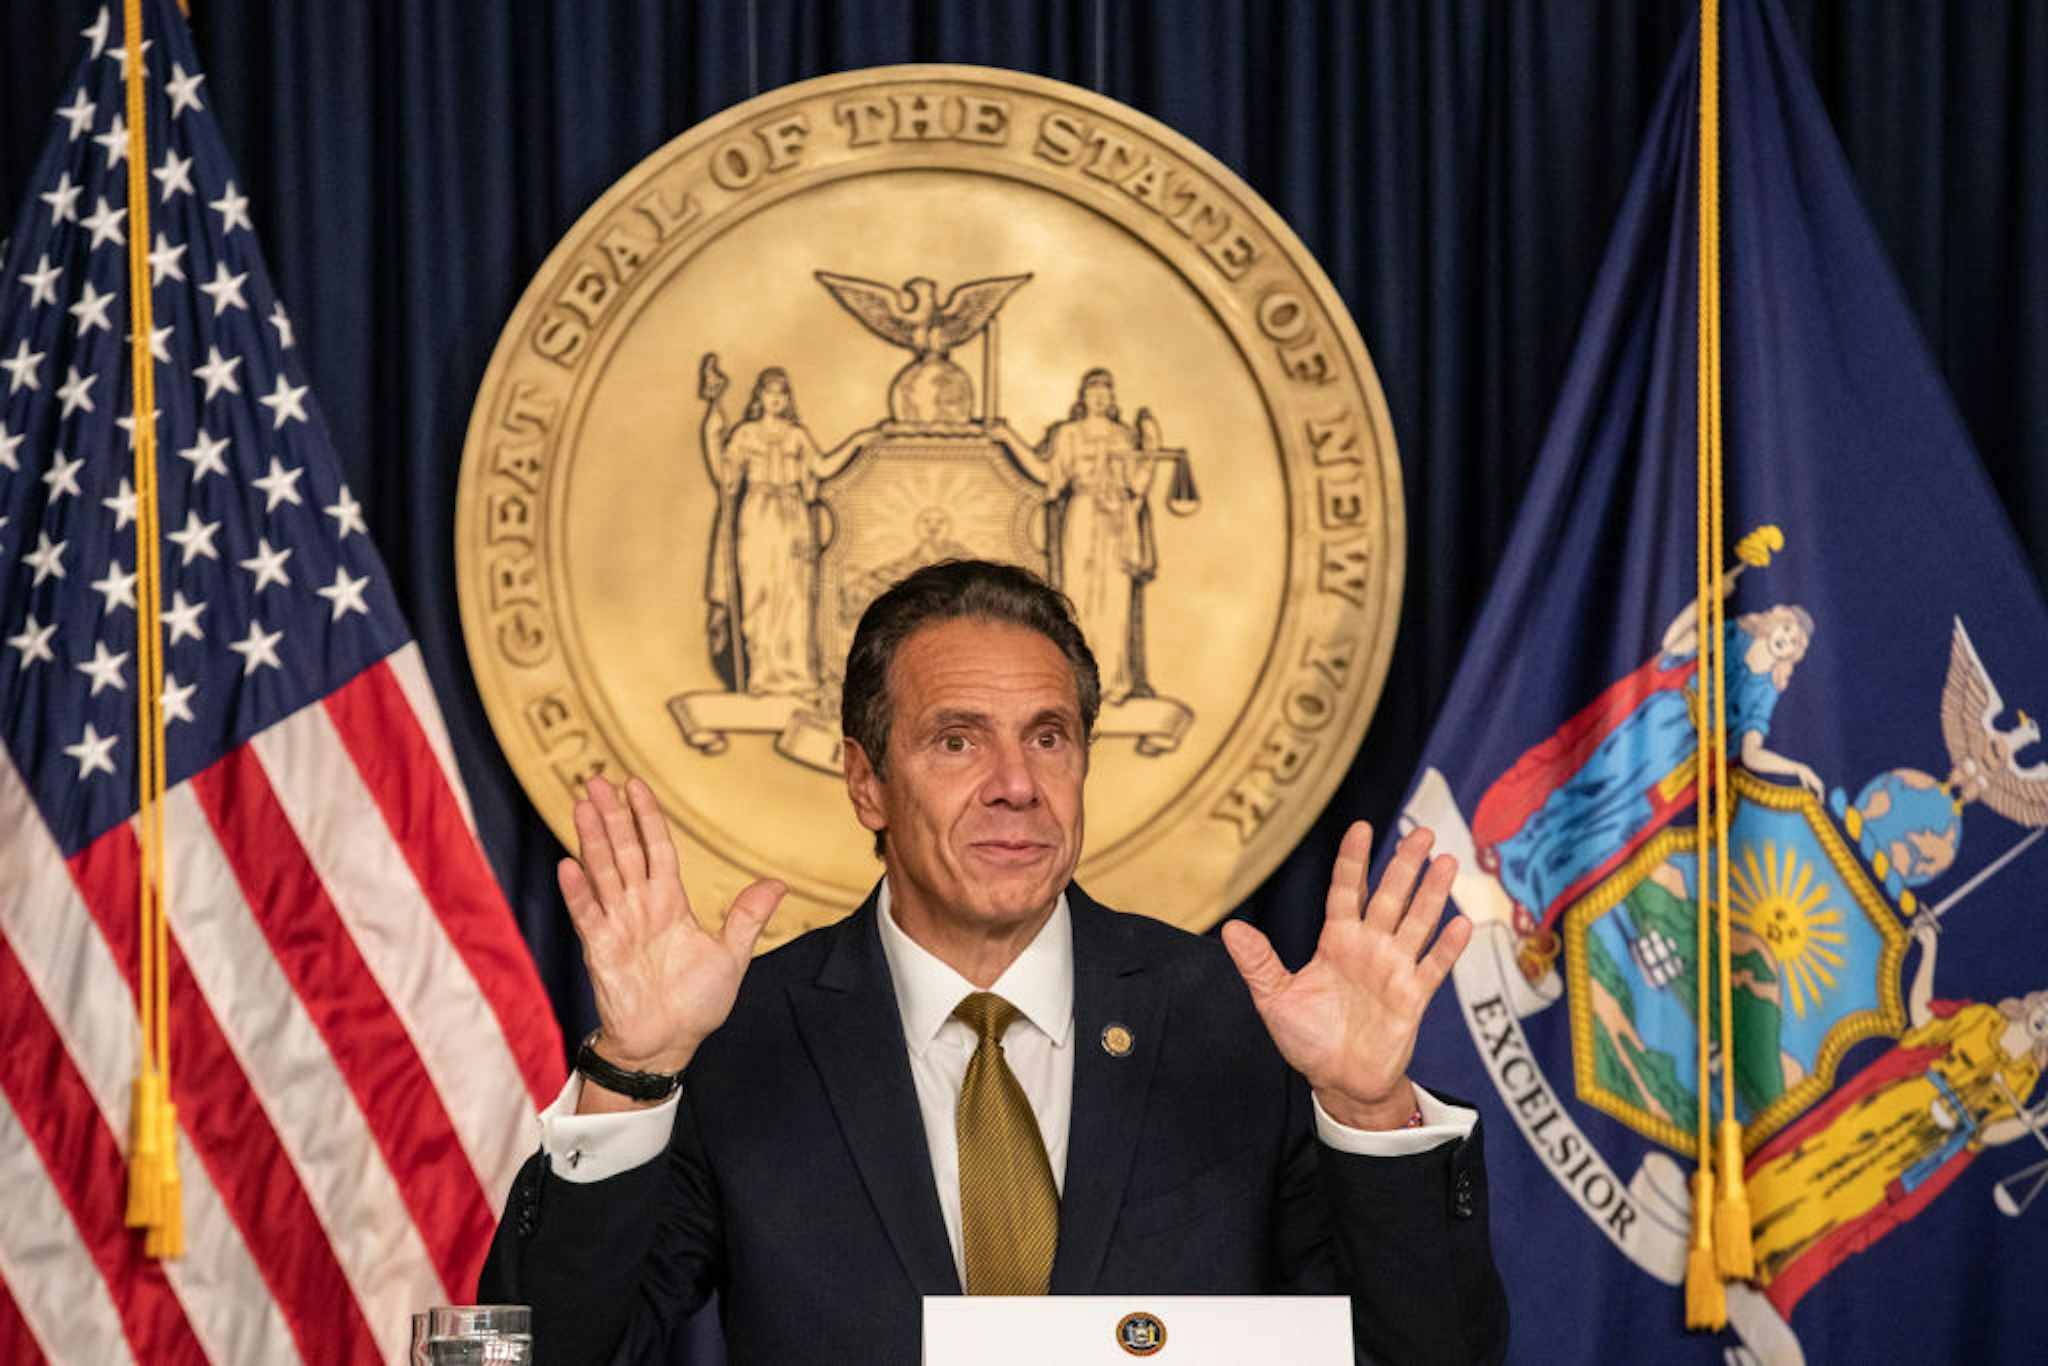 Andrew Cuomo, governor of New York, speaks during a news conference in New York, U.S., on Monday, Oct. 5, 2020.